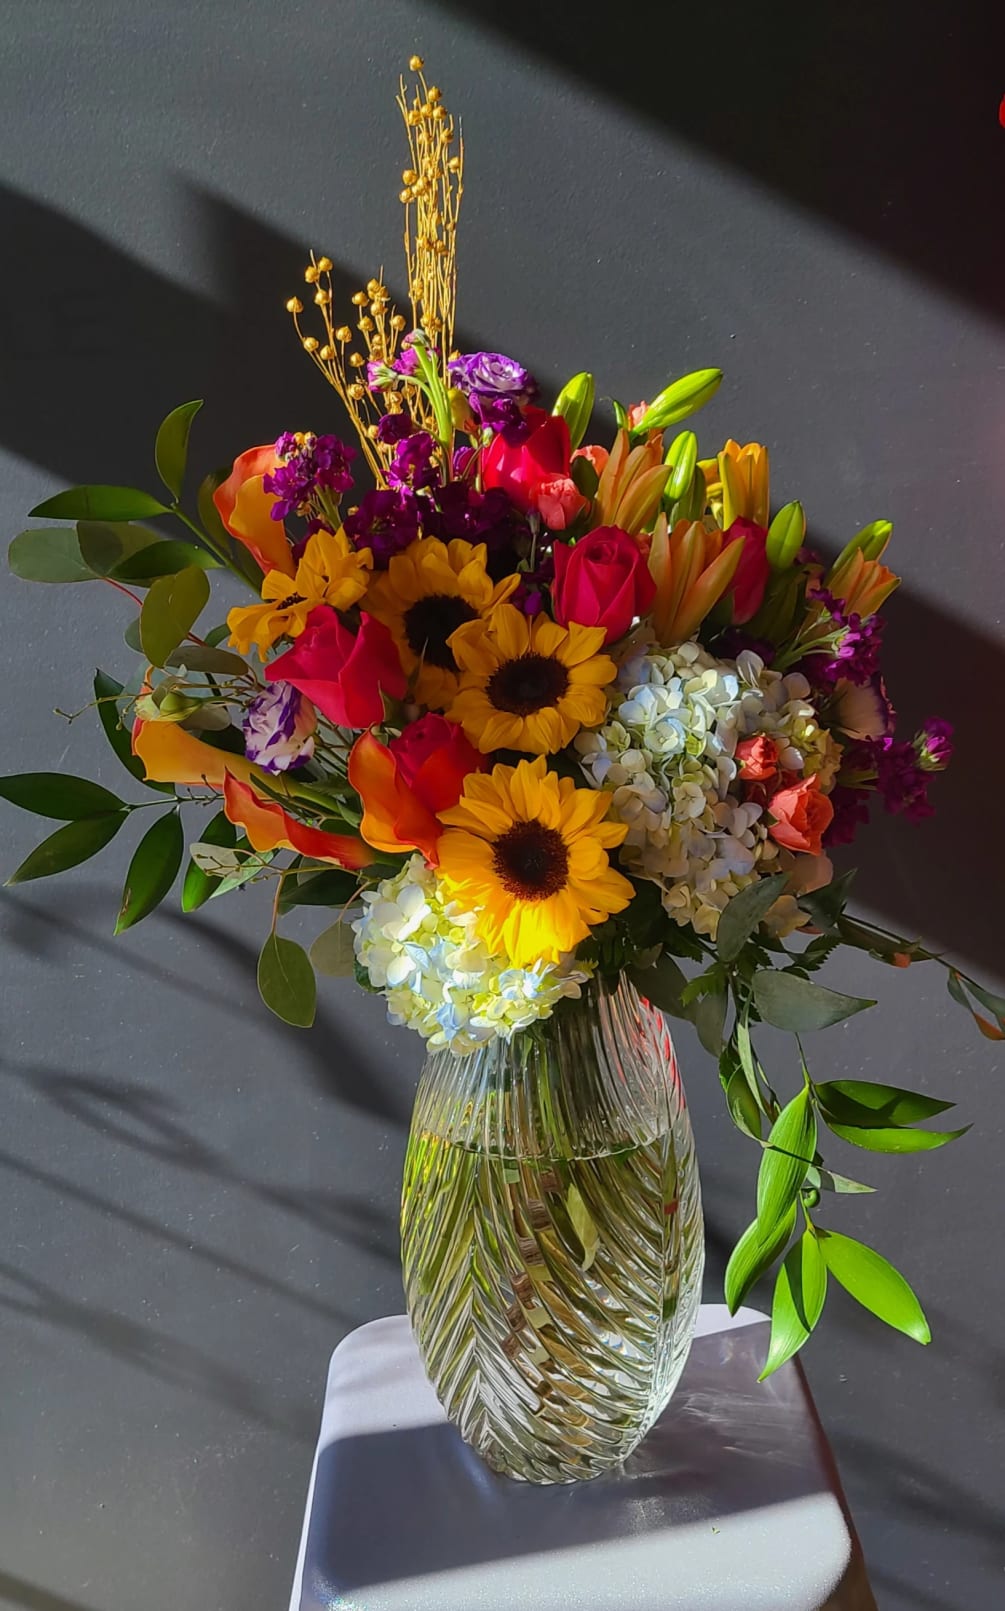 Give the gift of a rainbow with these colorful flowers! lilies, roses